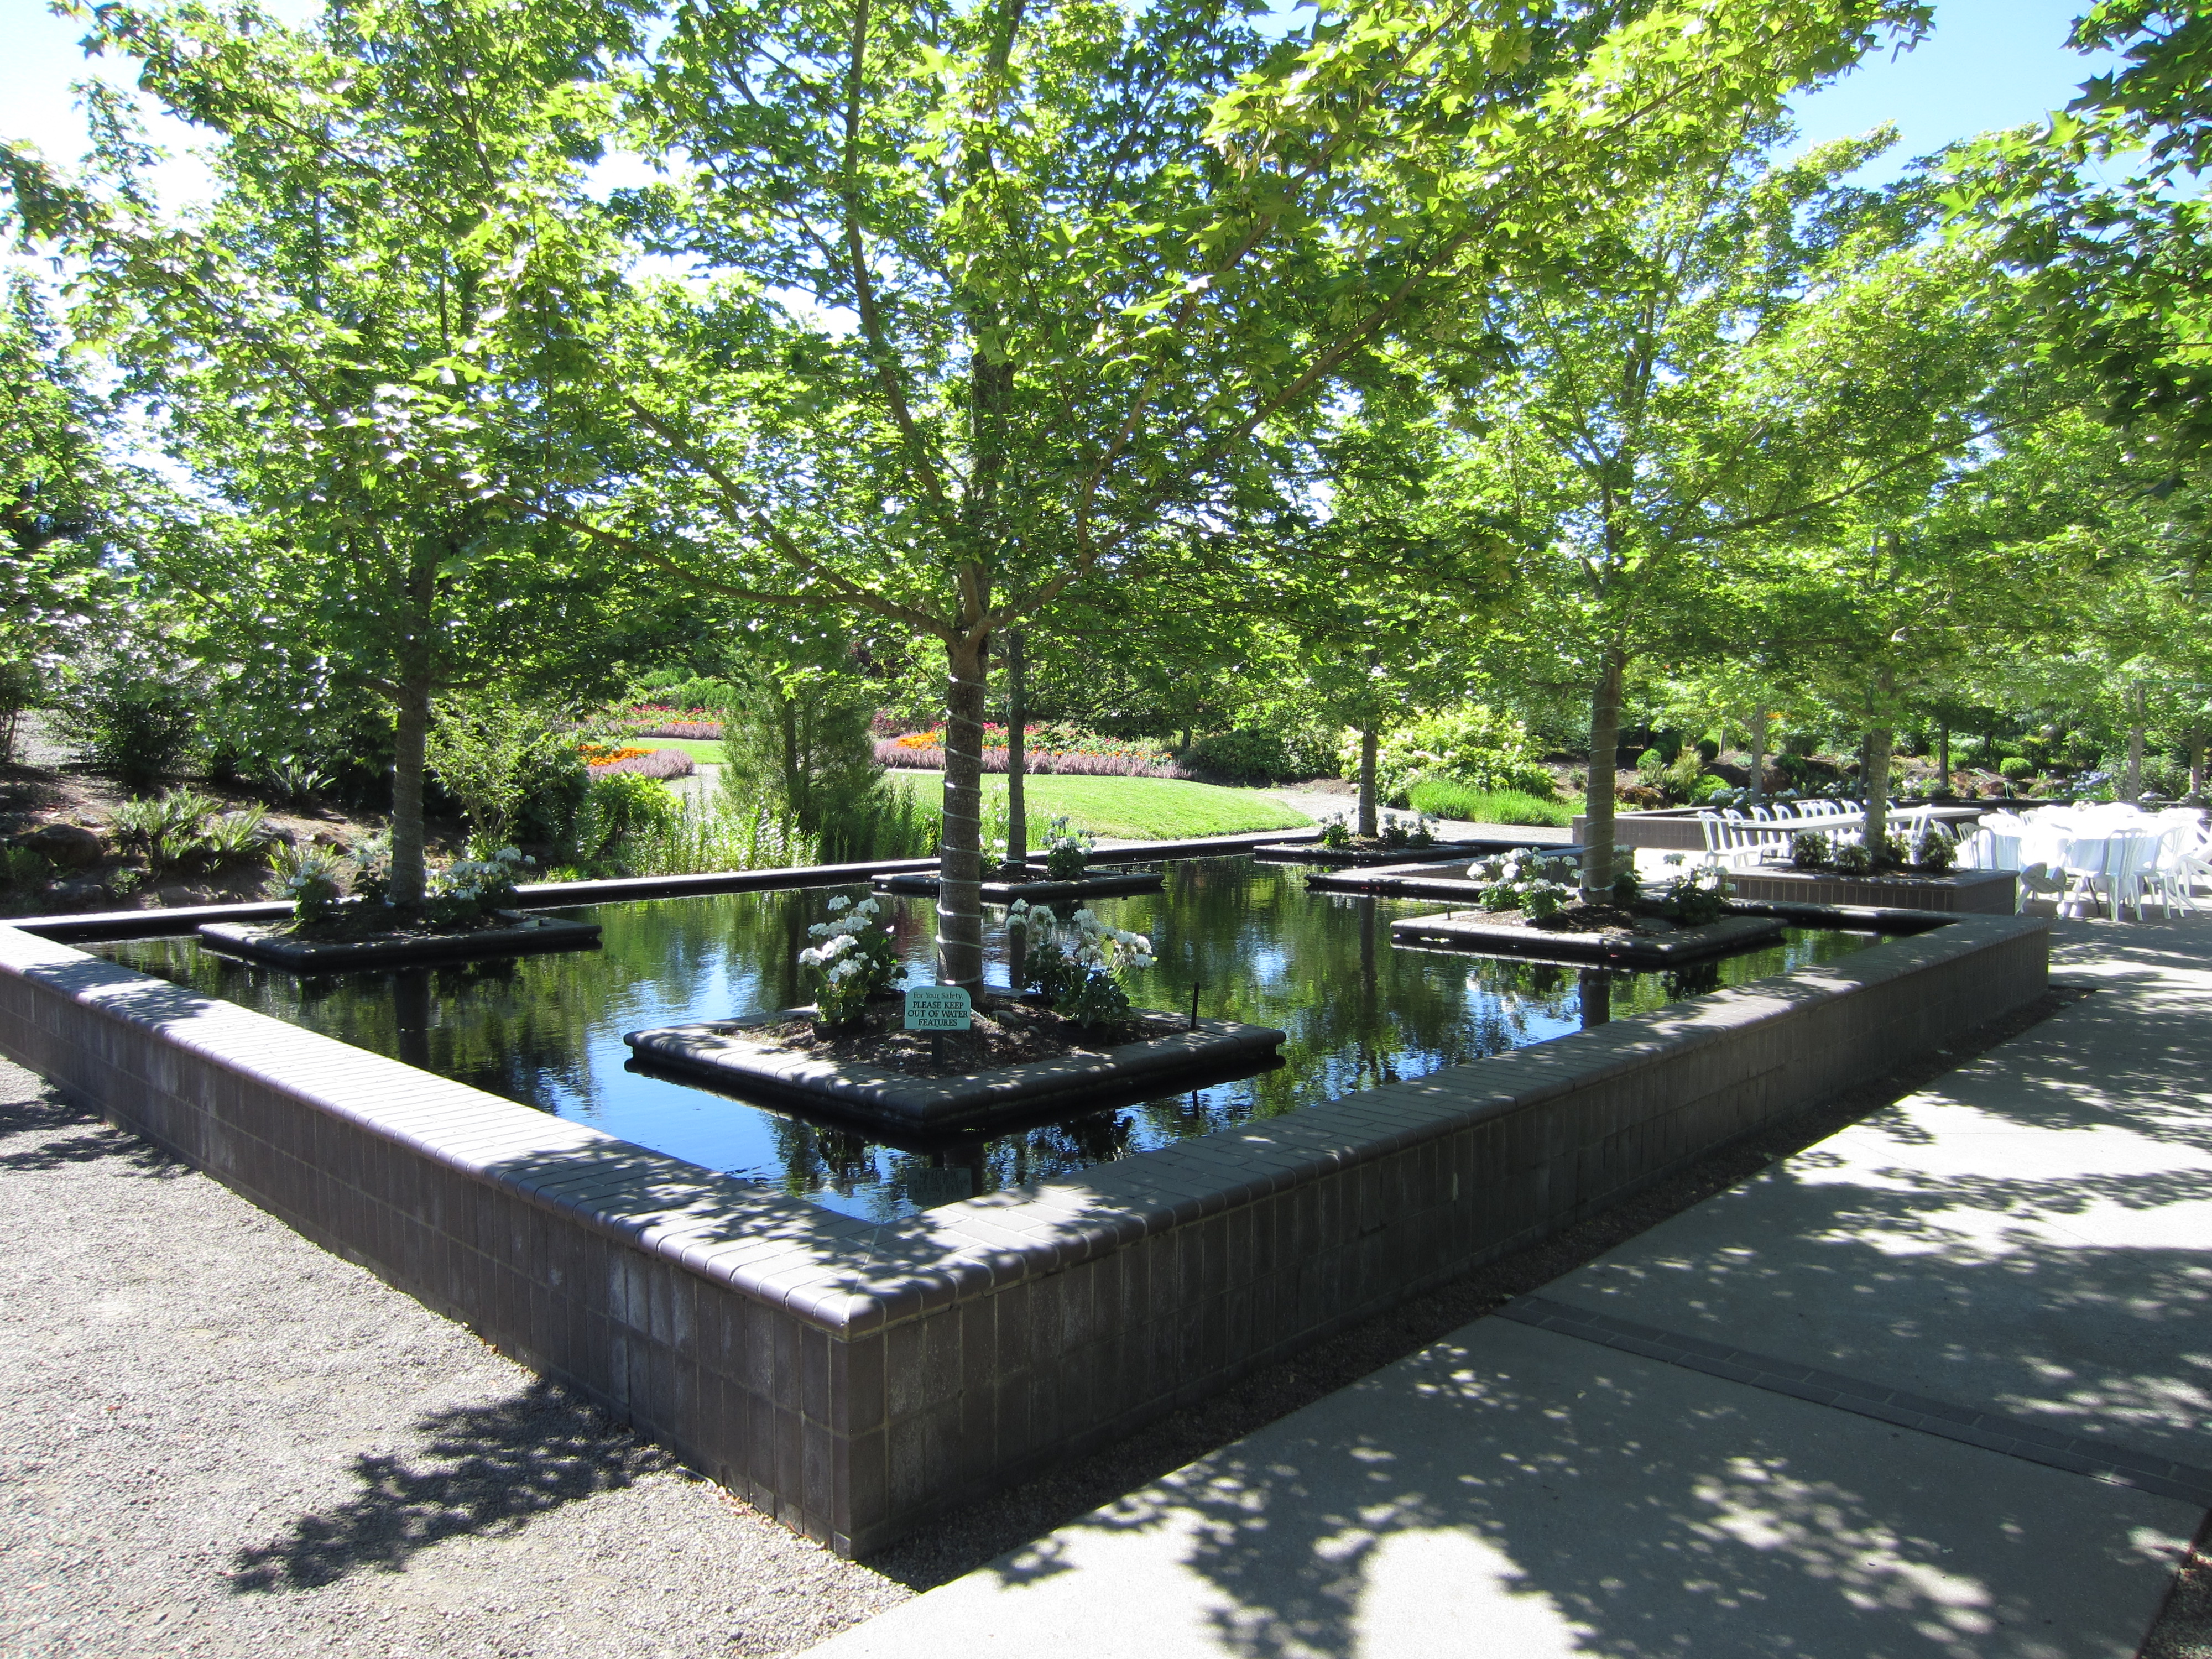 The Oregon Gardens – Not Your Average Engineer